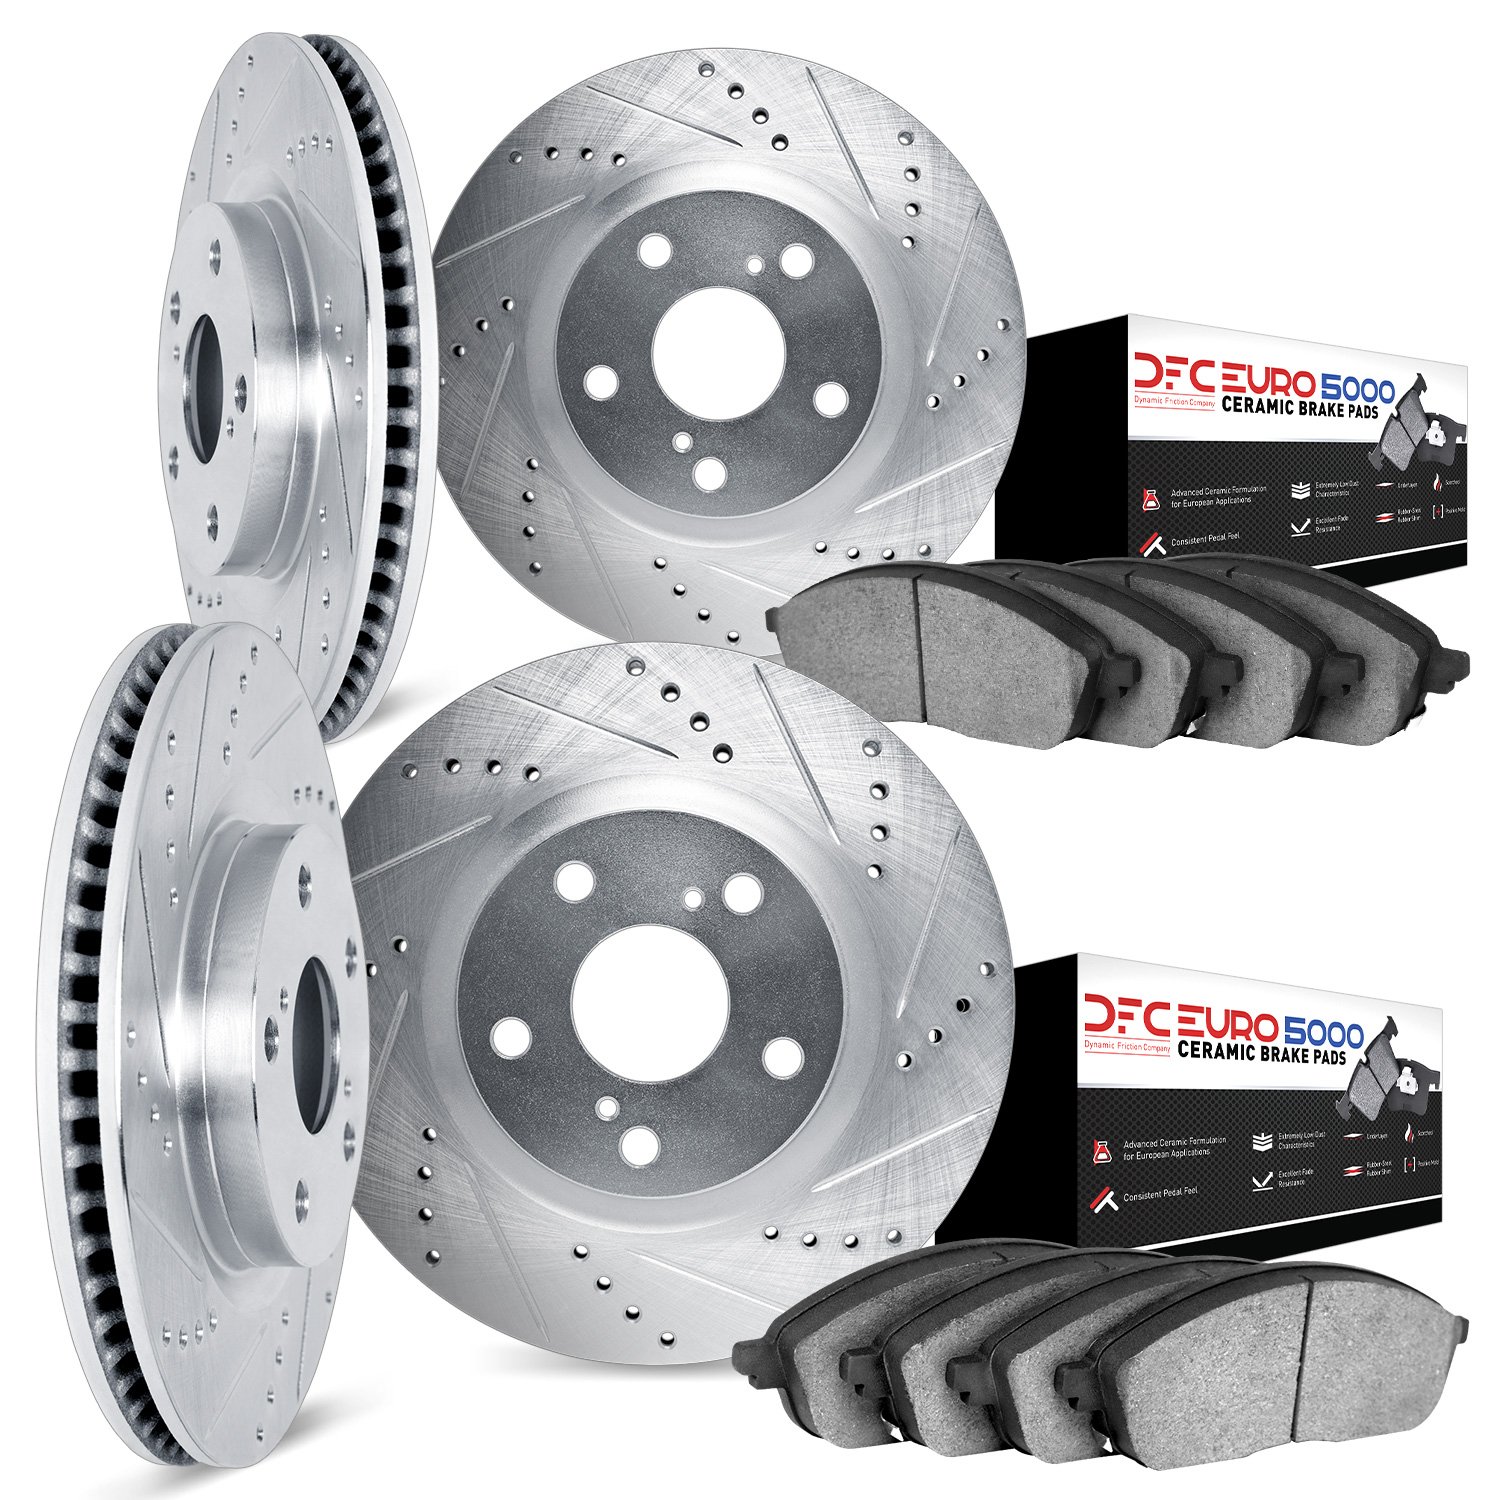 7604-31007 Drilled/Slotted Brake Rotors w/5000 Euro Ceramic Brake Pads Kit [Silver], 1994-1995 BMW, Position: Front and Rear